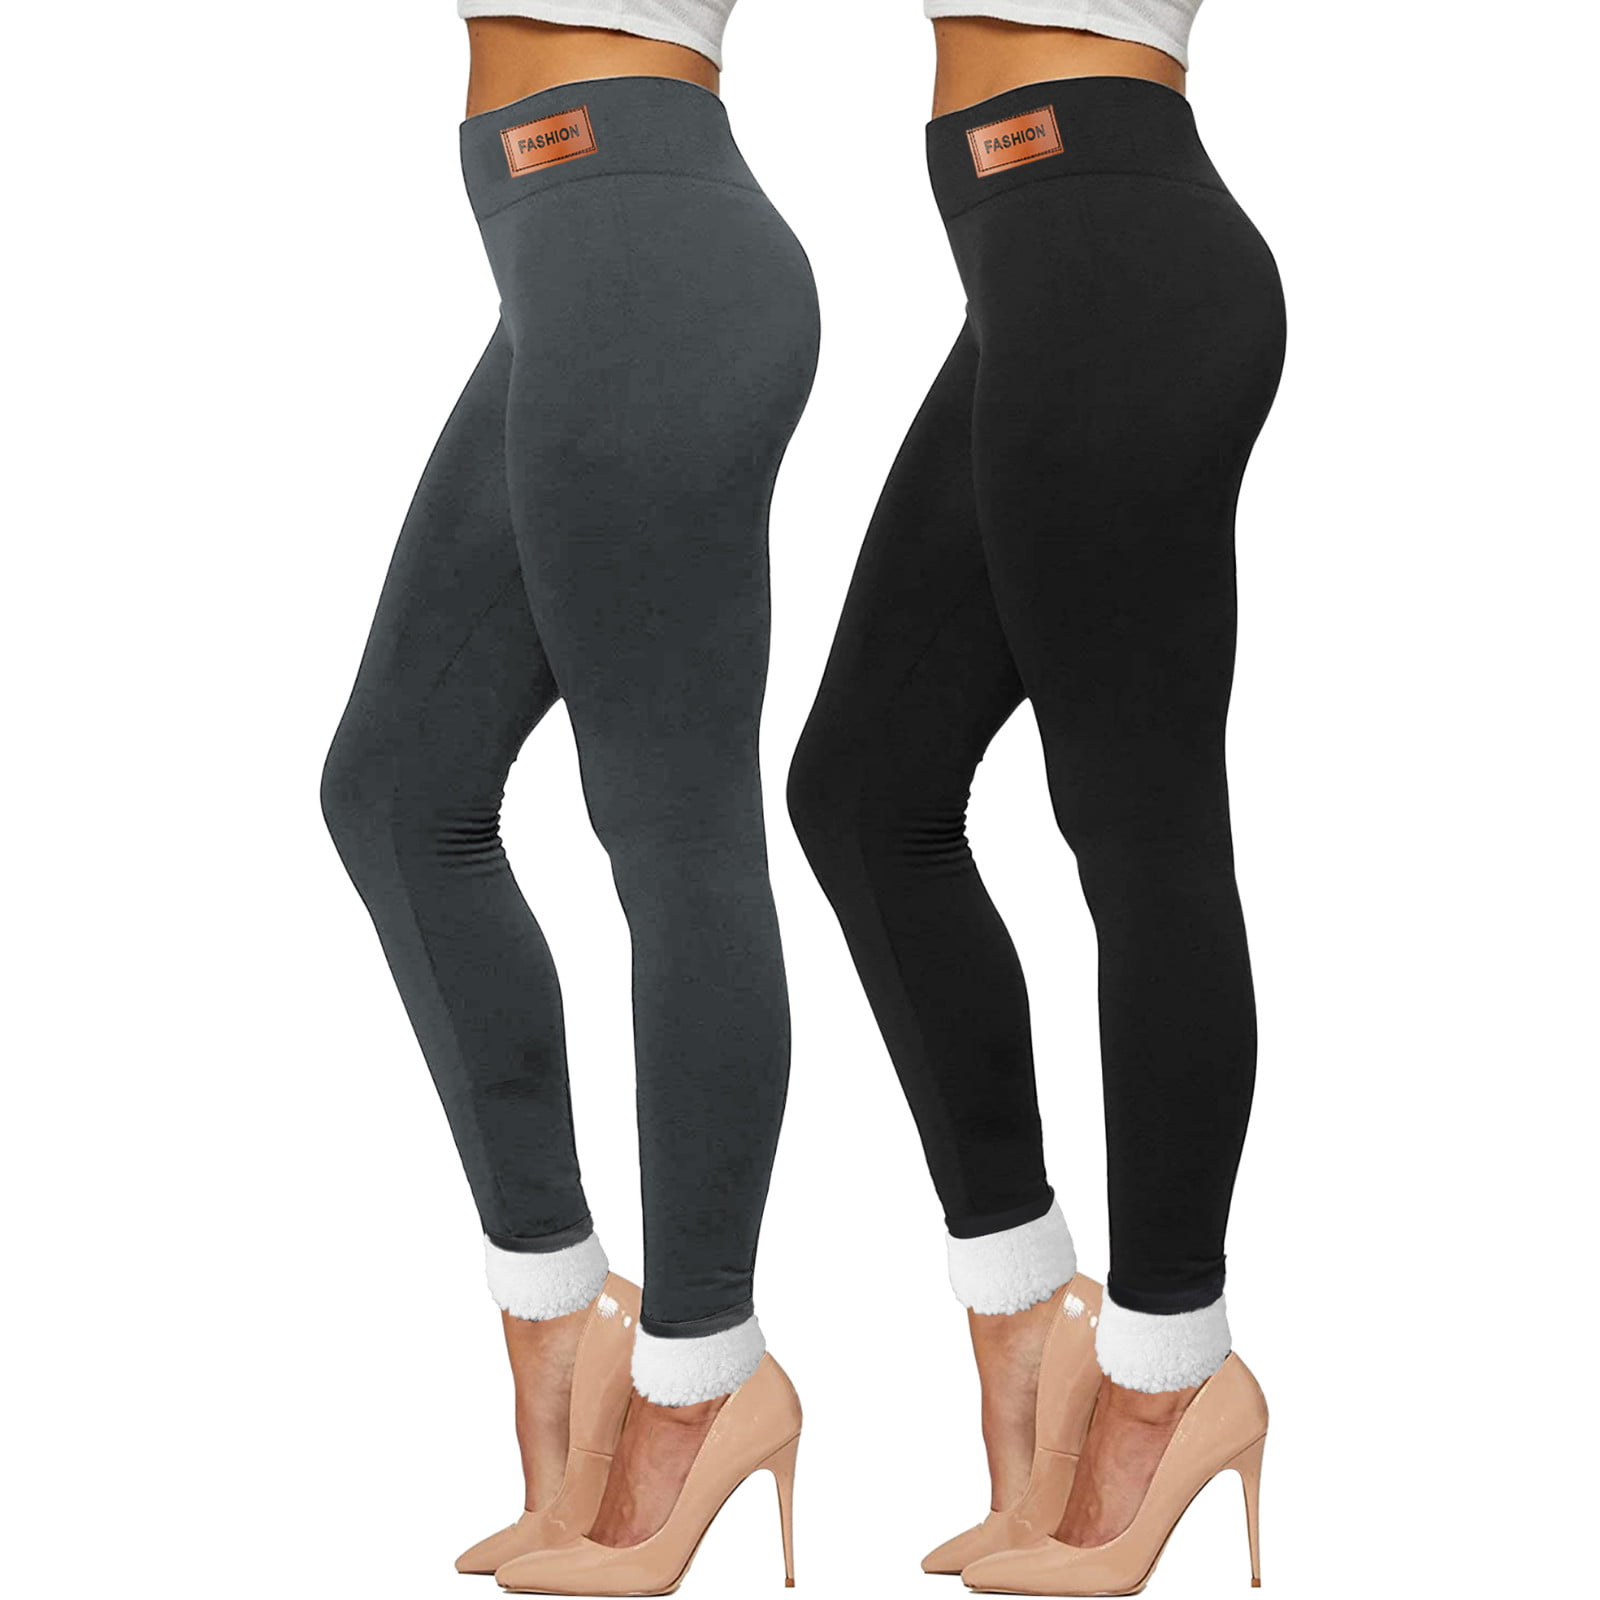 Women Winter Thick Extra Warm Soft Fleece Lined Thermal Stretchy Leggings Pants Clothes Shoes